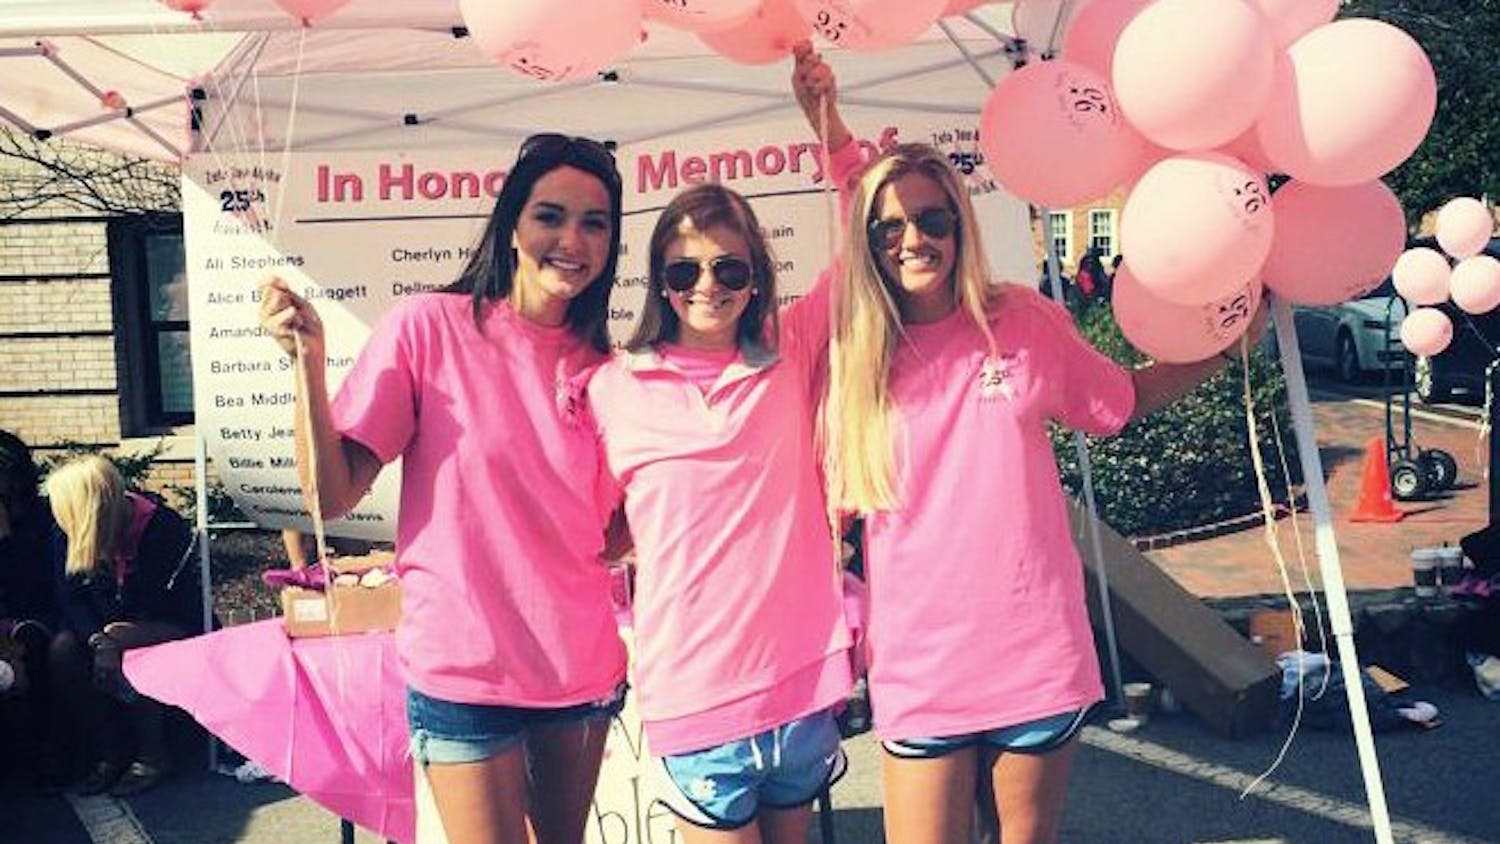 Zeta Tau Alpha's "Think Pink" campaign will start at the end of the month.